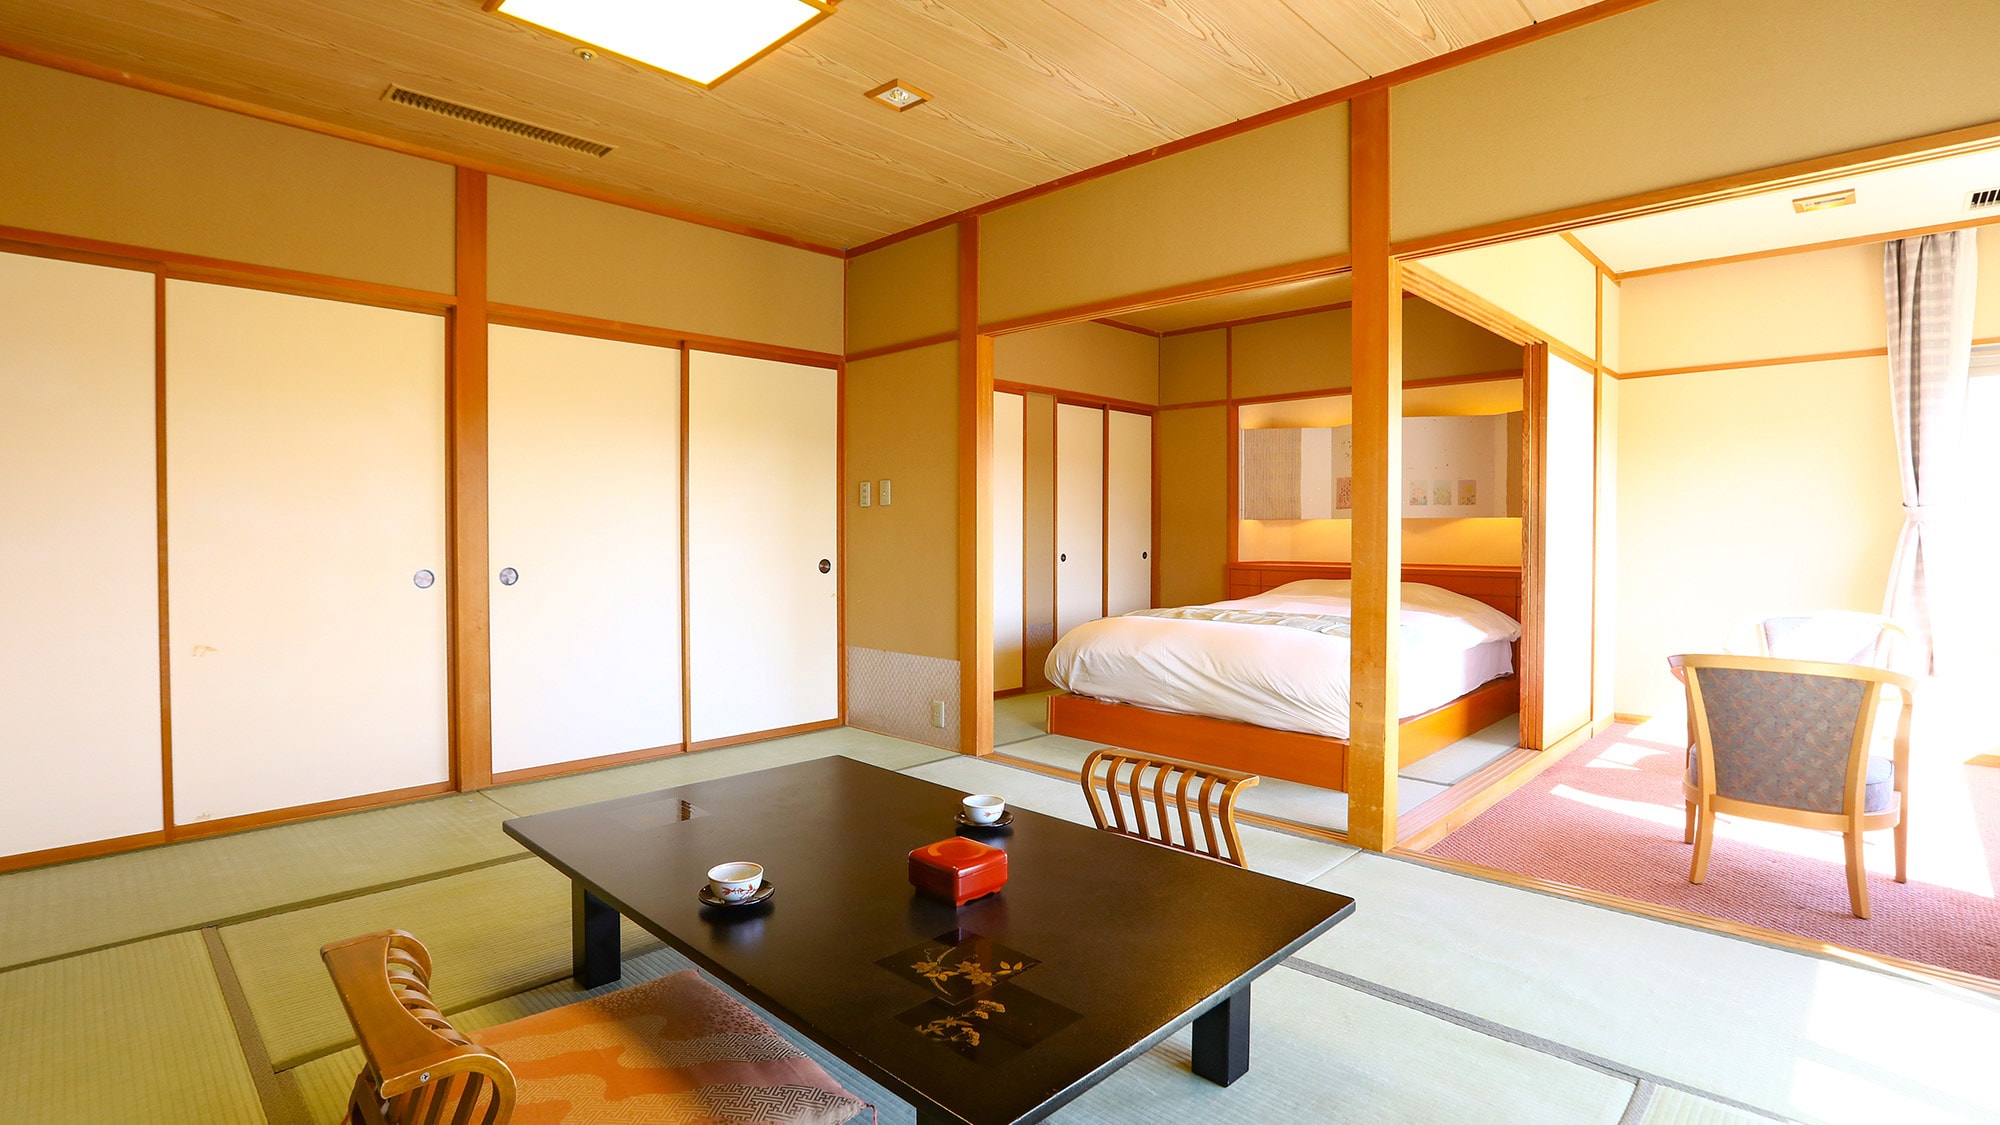 [Non-smoking] Japanese-style room 10 tatami mats + 4.5 tatami mats + 1 semi-double bed (example) & hellip; Simmons semi-double bed is included